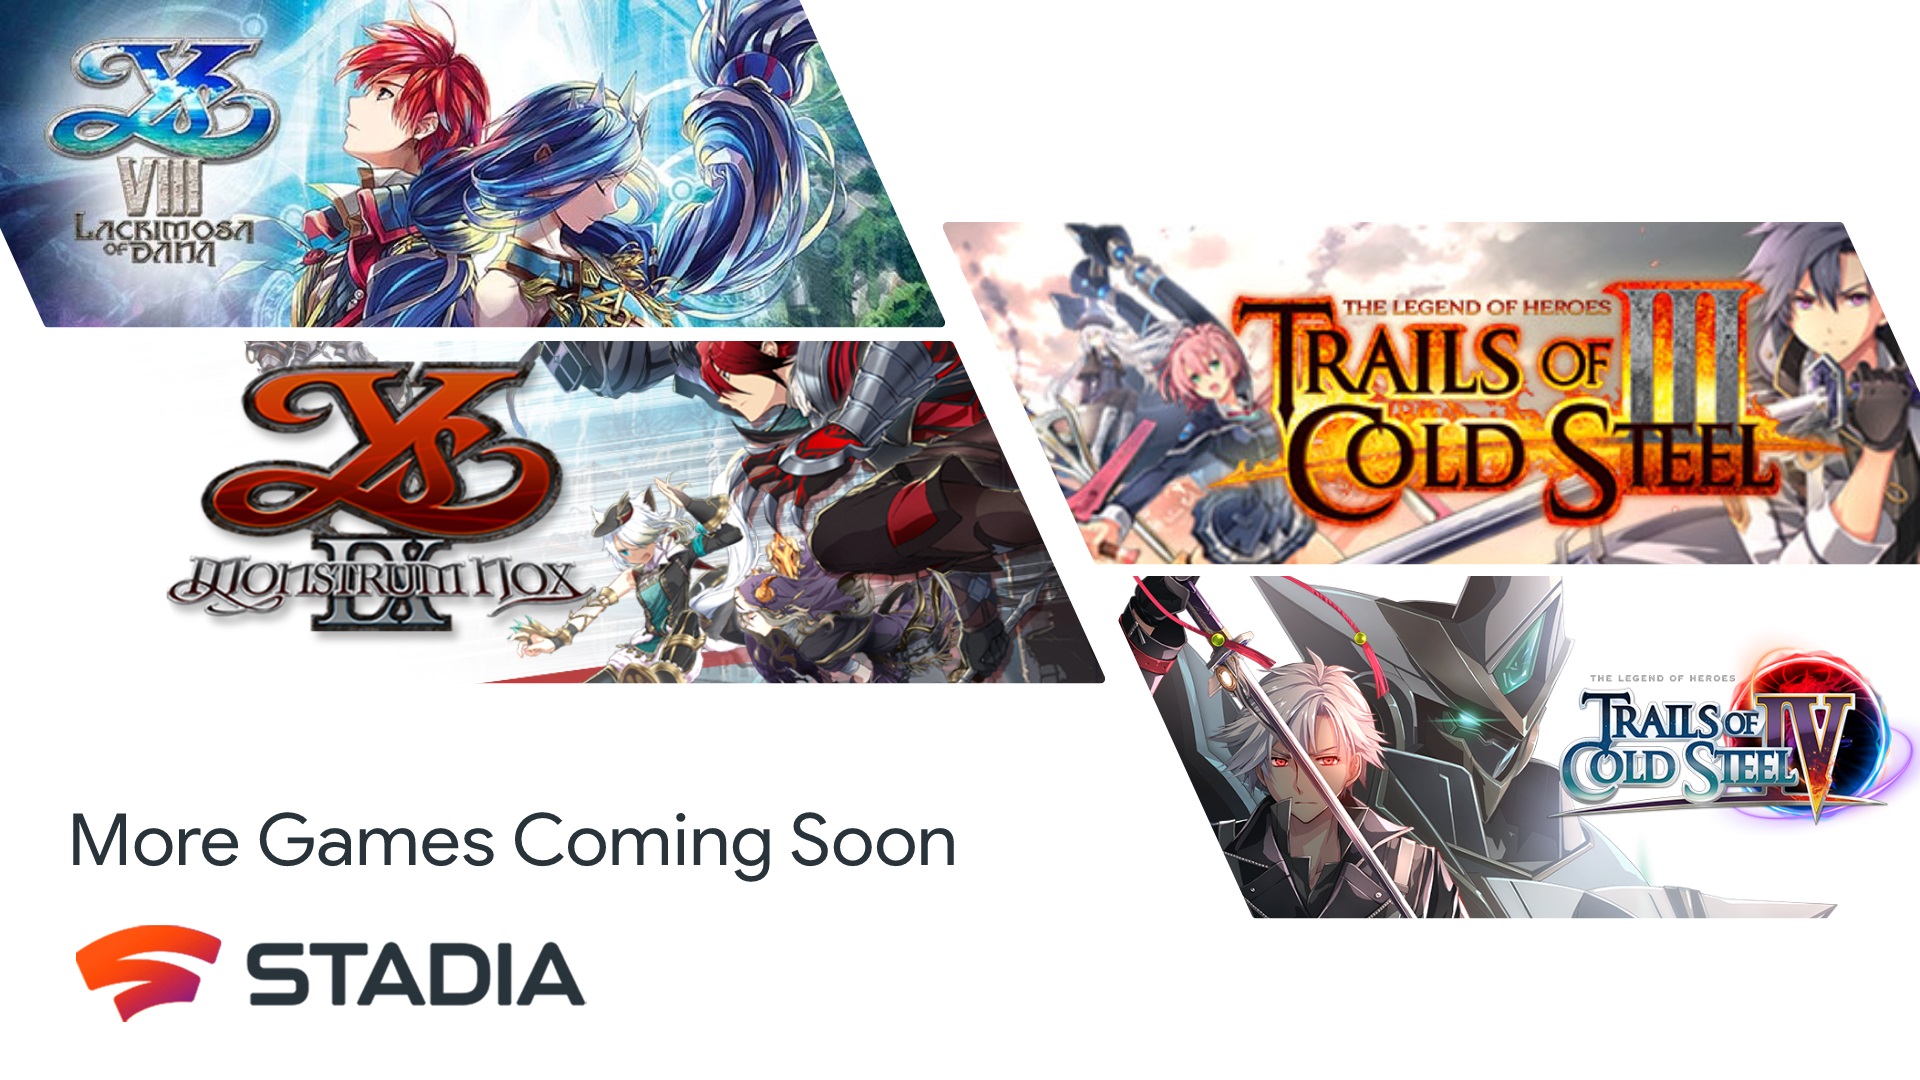 Ys VIII, Ys IX, The Legend of Heroes: Trails of Cold Steel III and The Legend of Heroes: Trails of Cold Steel IV Coming to Stadia